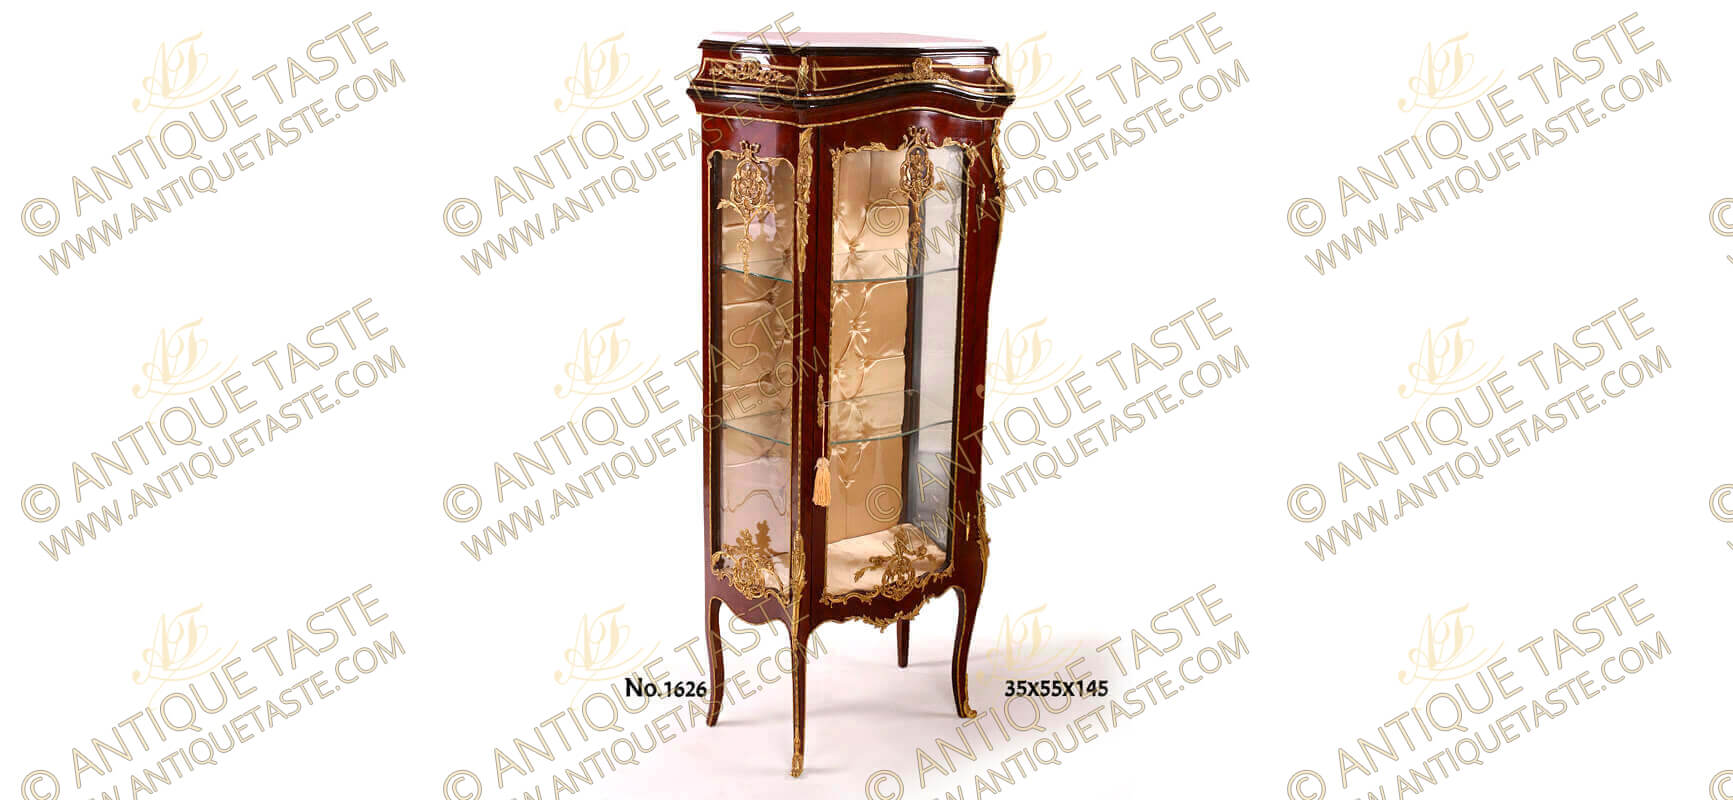 Vitrine, style Corner Reproductions Display Furniture Louis French XV Cabinet, XVI Louis